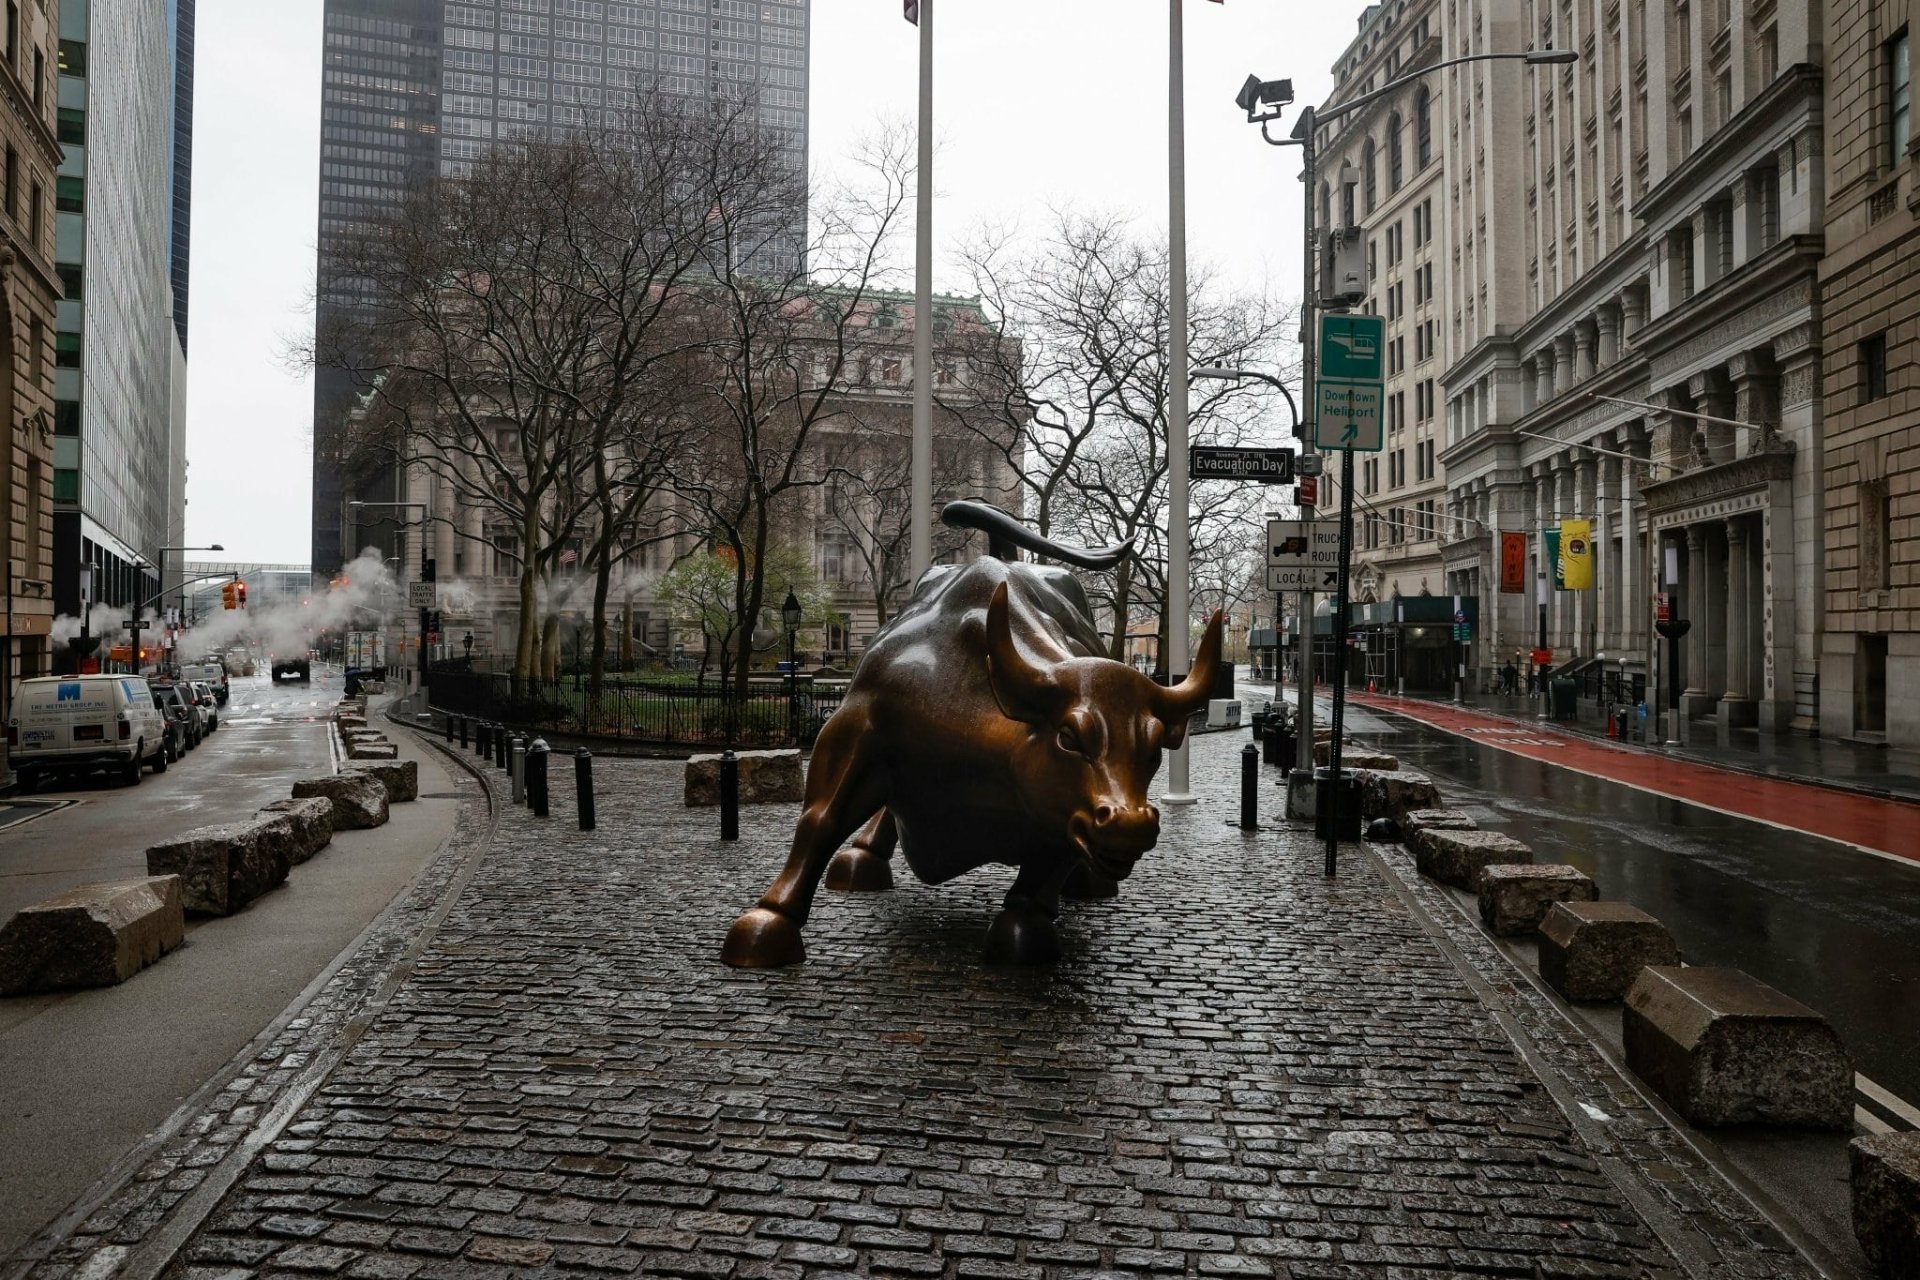 Bull, sometimes referred to as the Wall Street Bull, bronze sculpture, Manh...